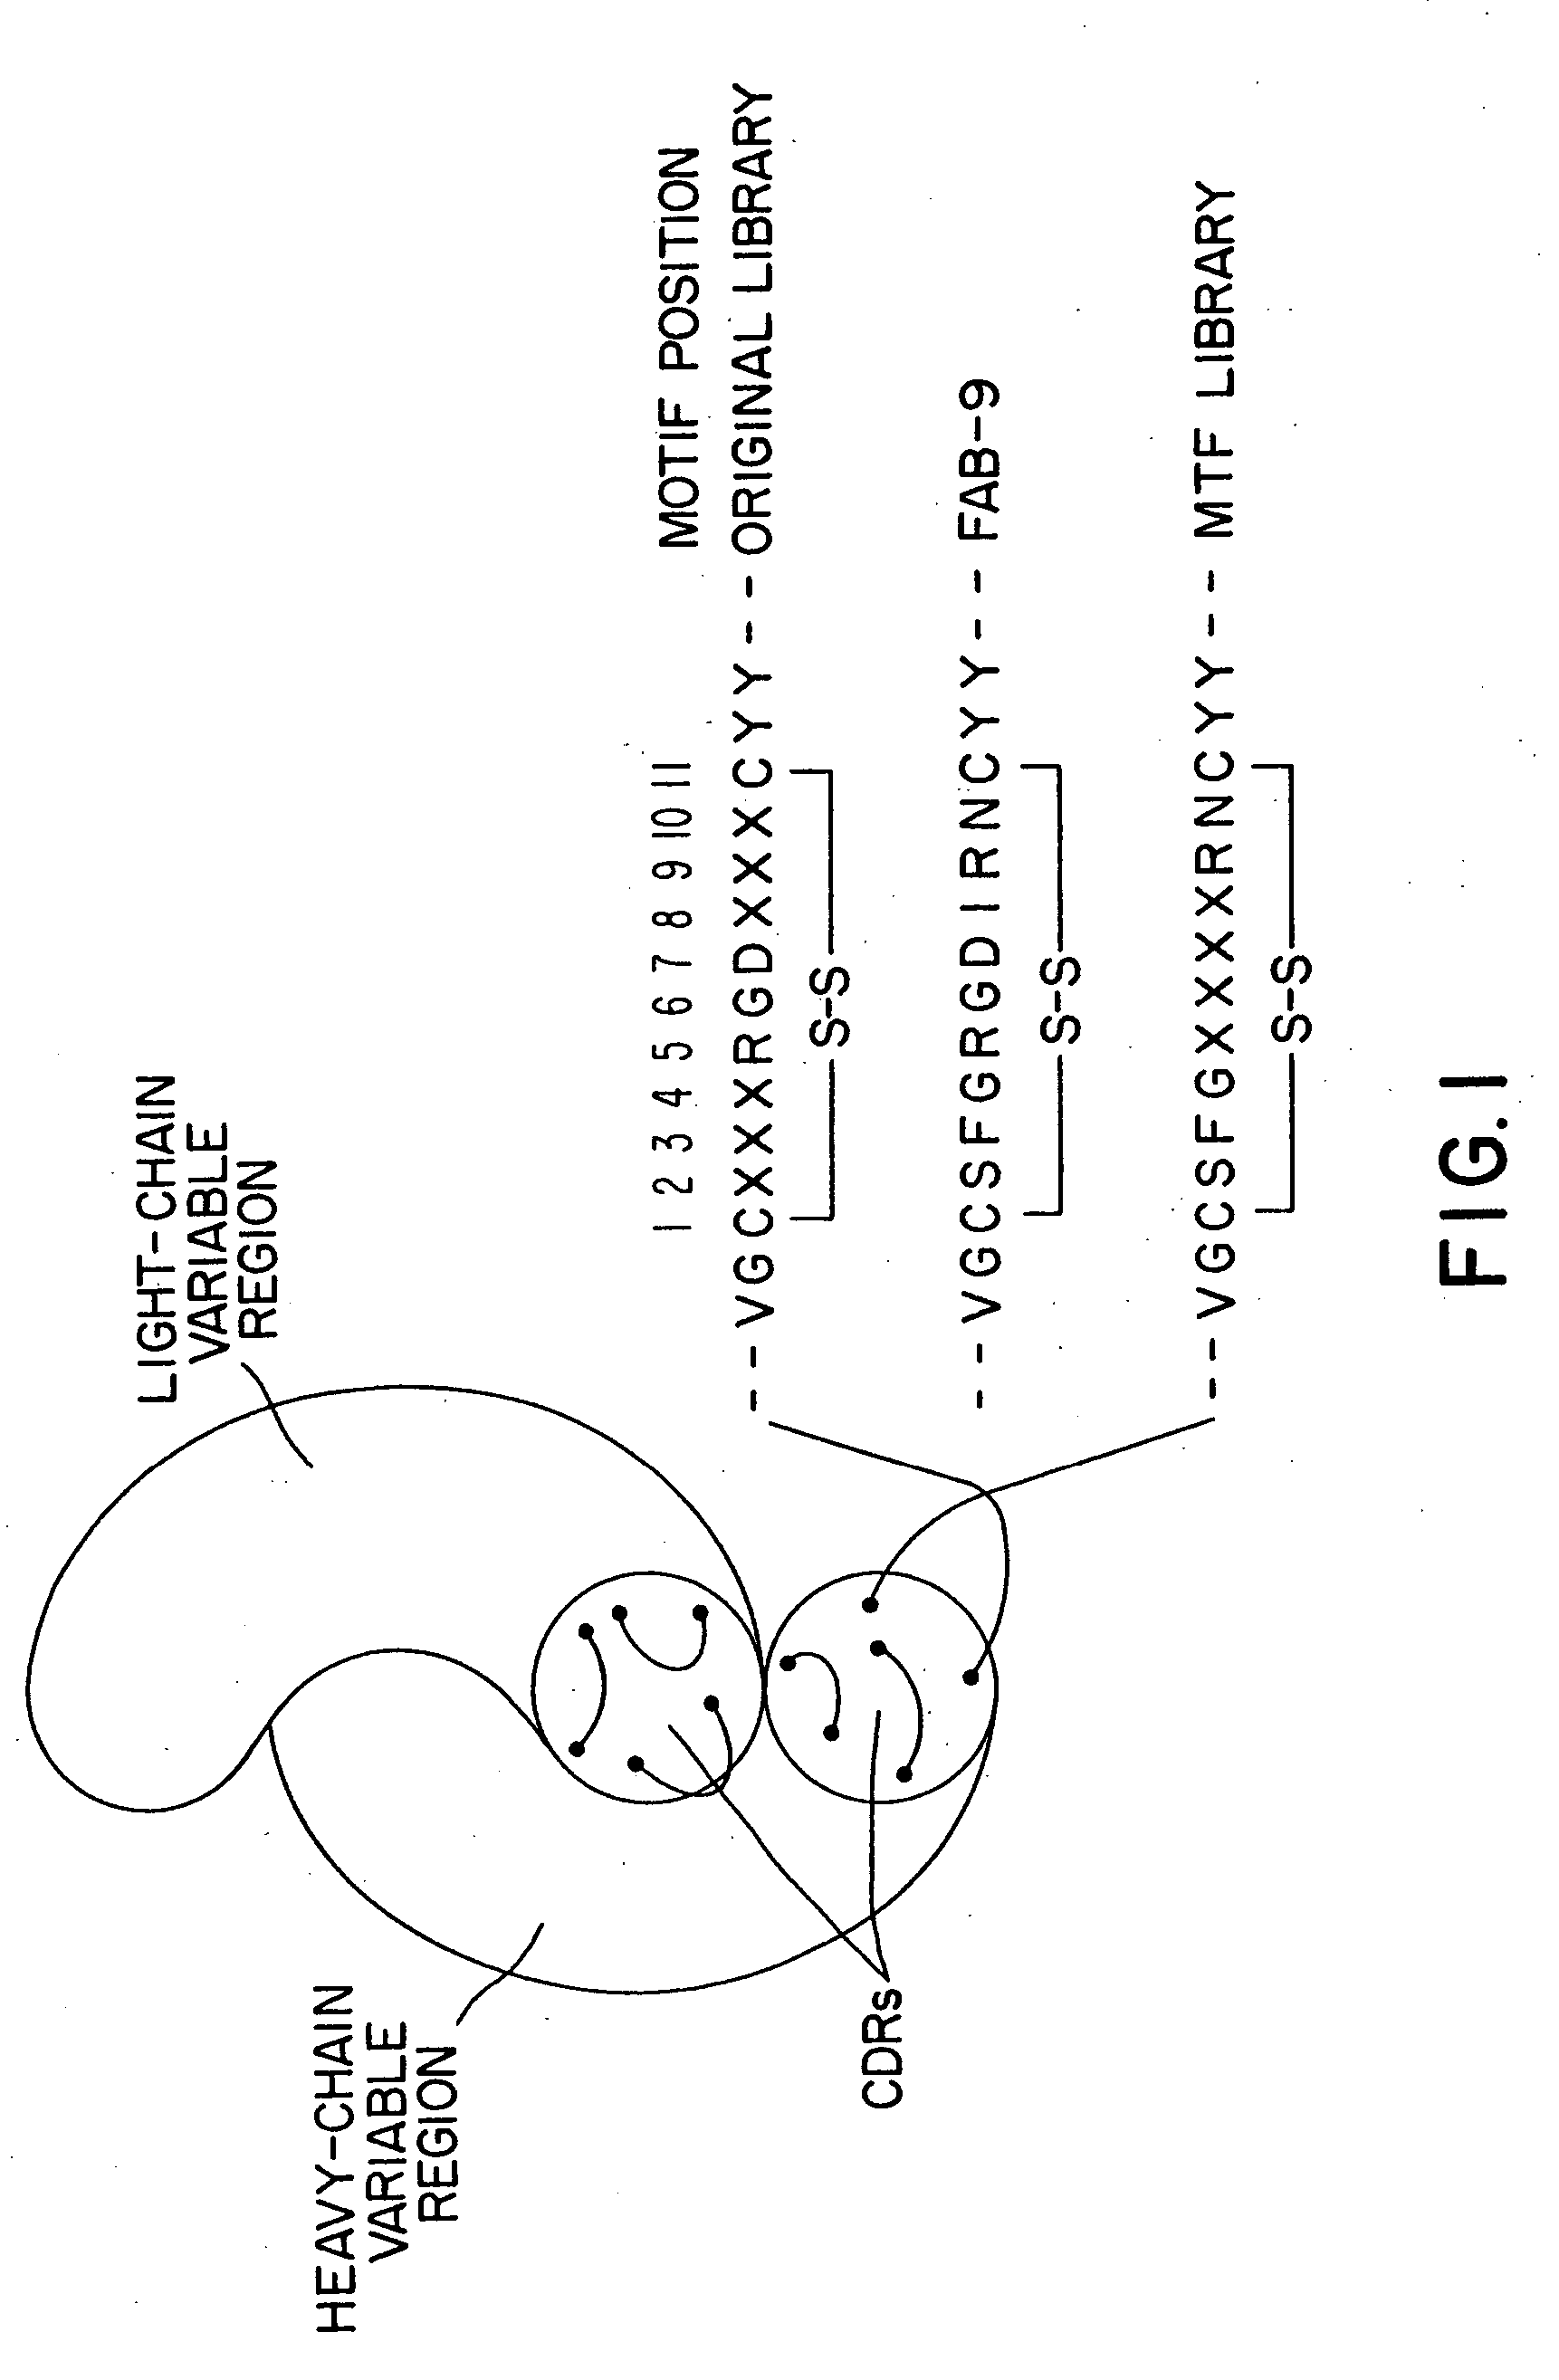 Methods for producing polypeptide binding sites, monoclonal antibodies and compositions thereof